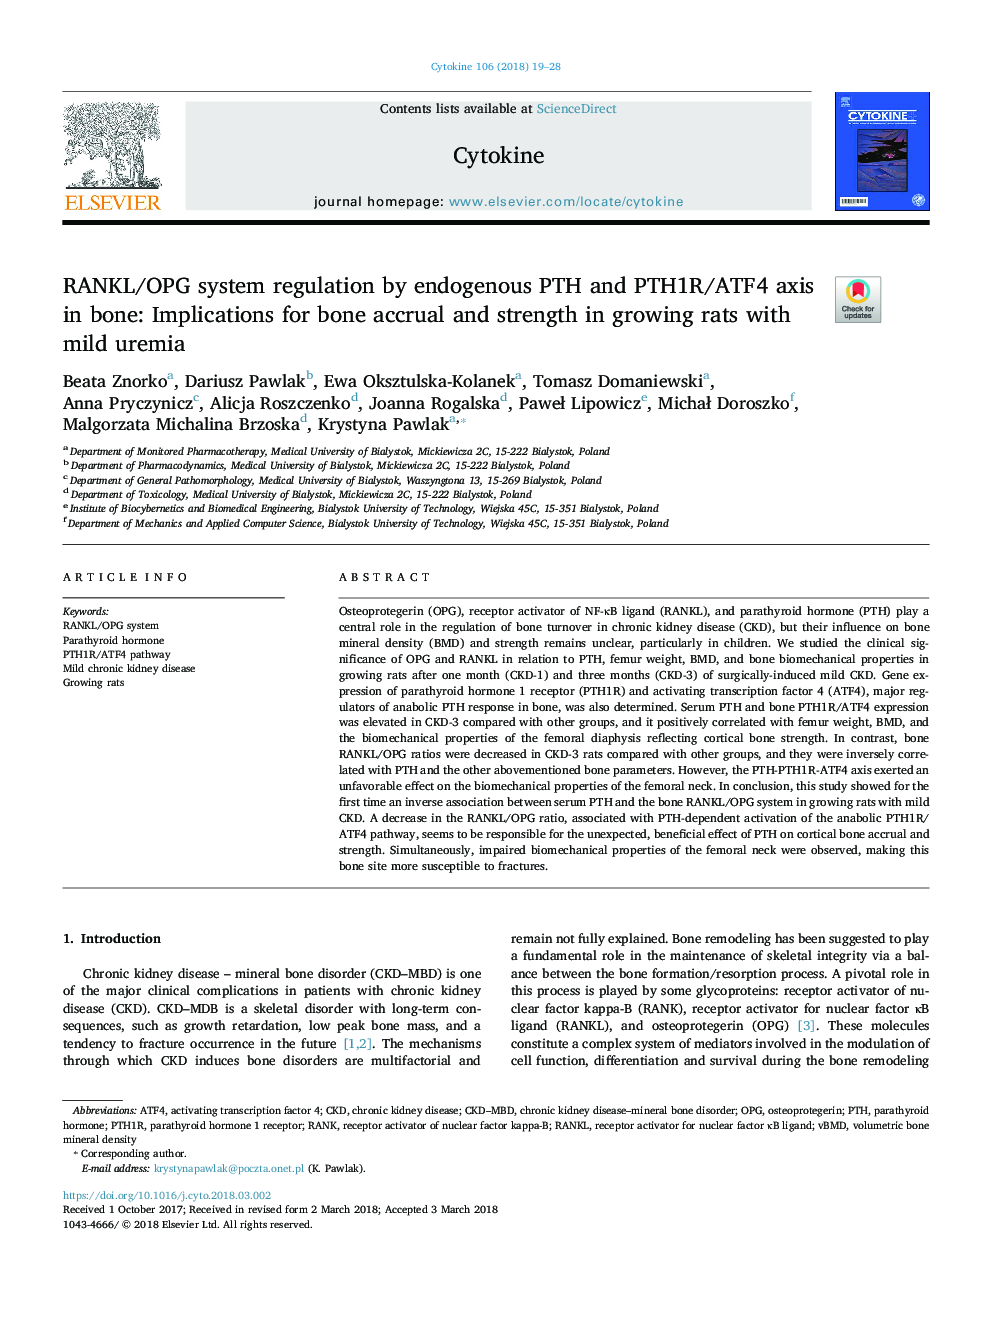 RANKL/OPG system regulation by endogenous PTH and PTH1R/ATF4 axis in bone: Implications for bone accrual and strength in growing rats with mild uremia